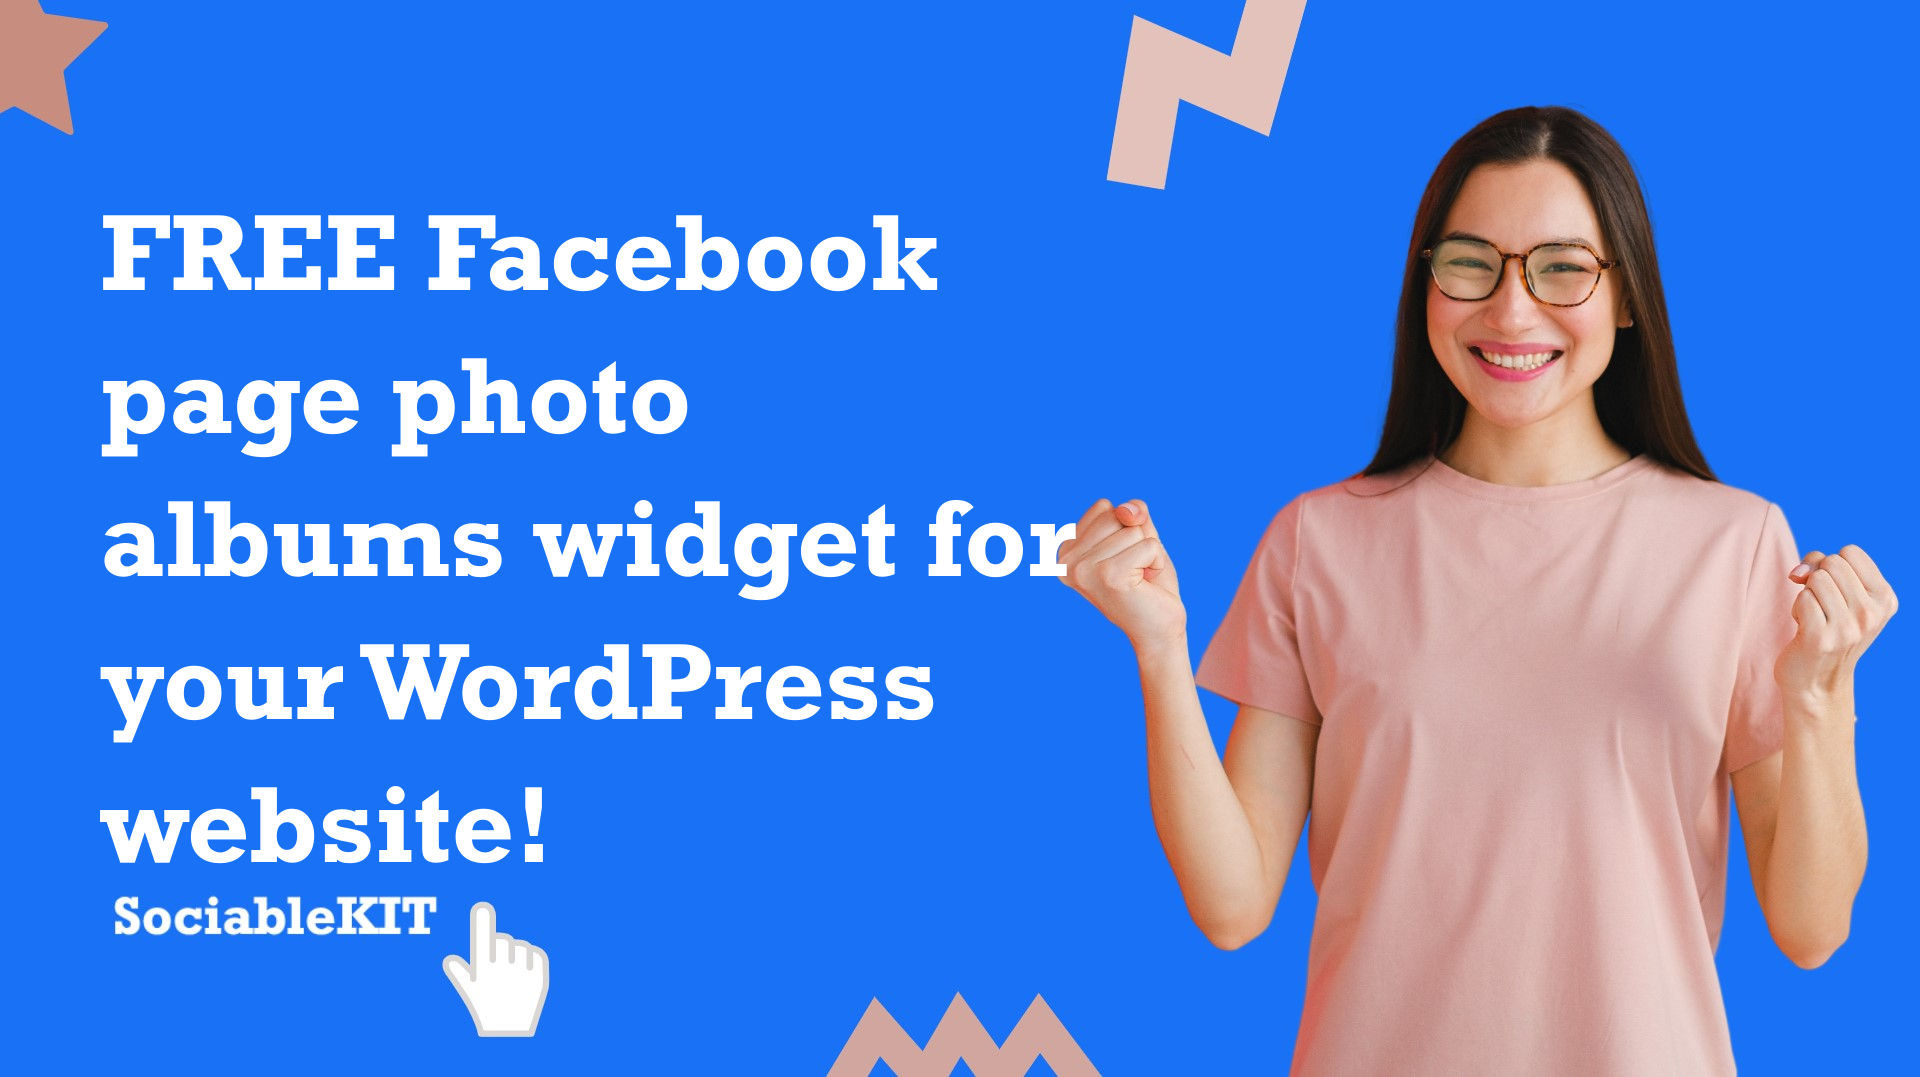 Free Facebook page photo albums widget for your WordPress website